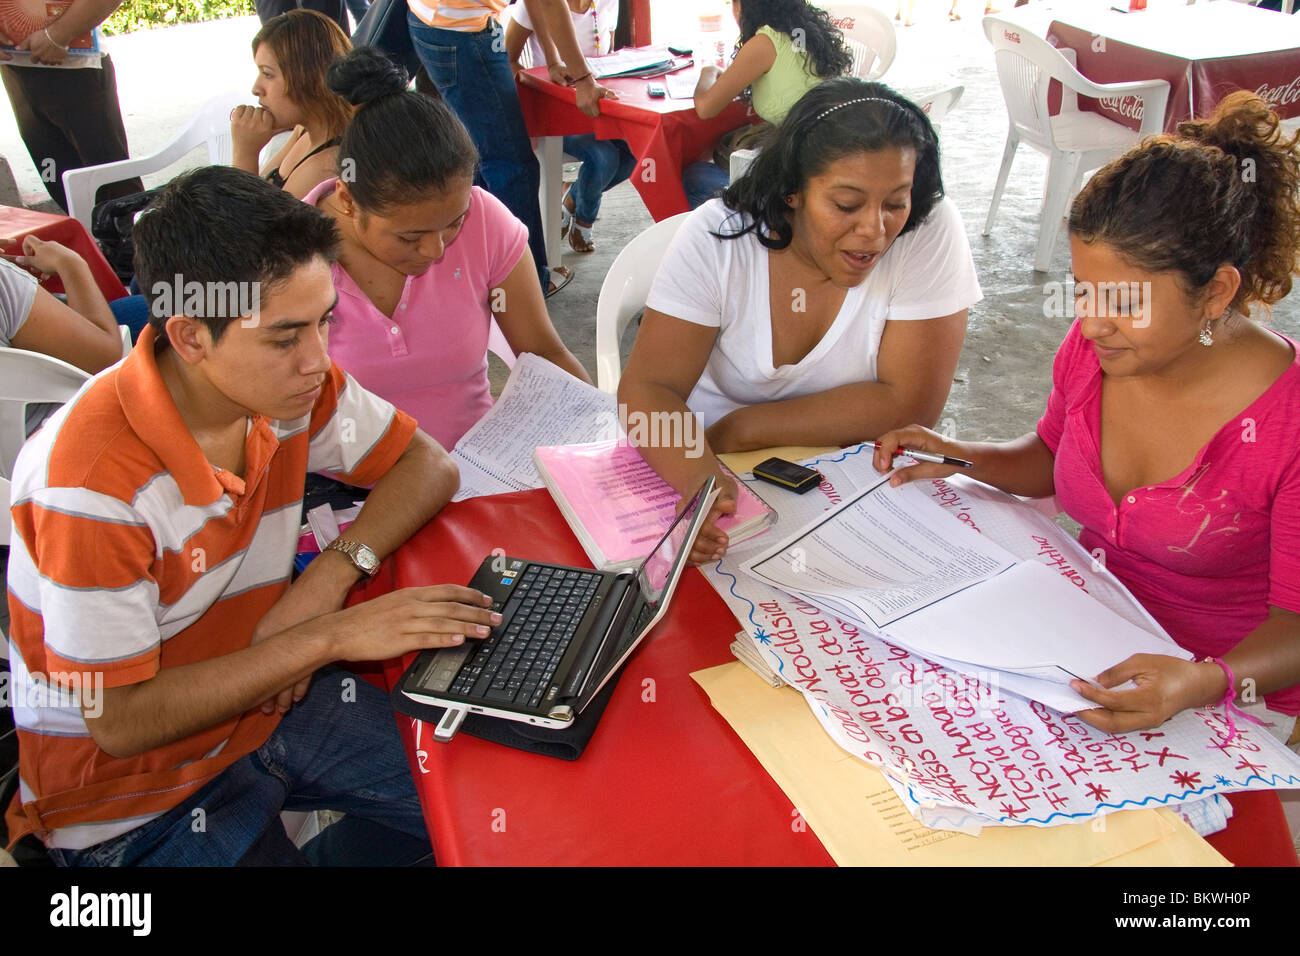 Mexican college students study together on the campus of Universidad Autonoma de Guerro located in Acapulco, Guerrero, Mexico. Stock Photo